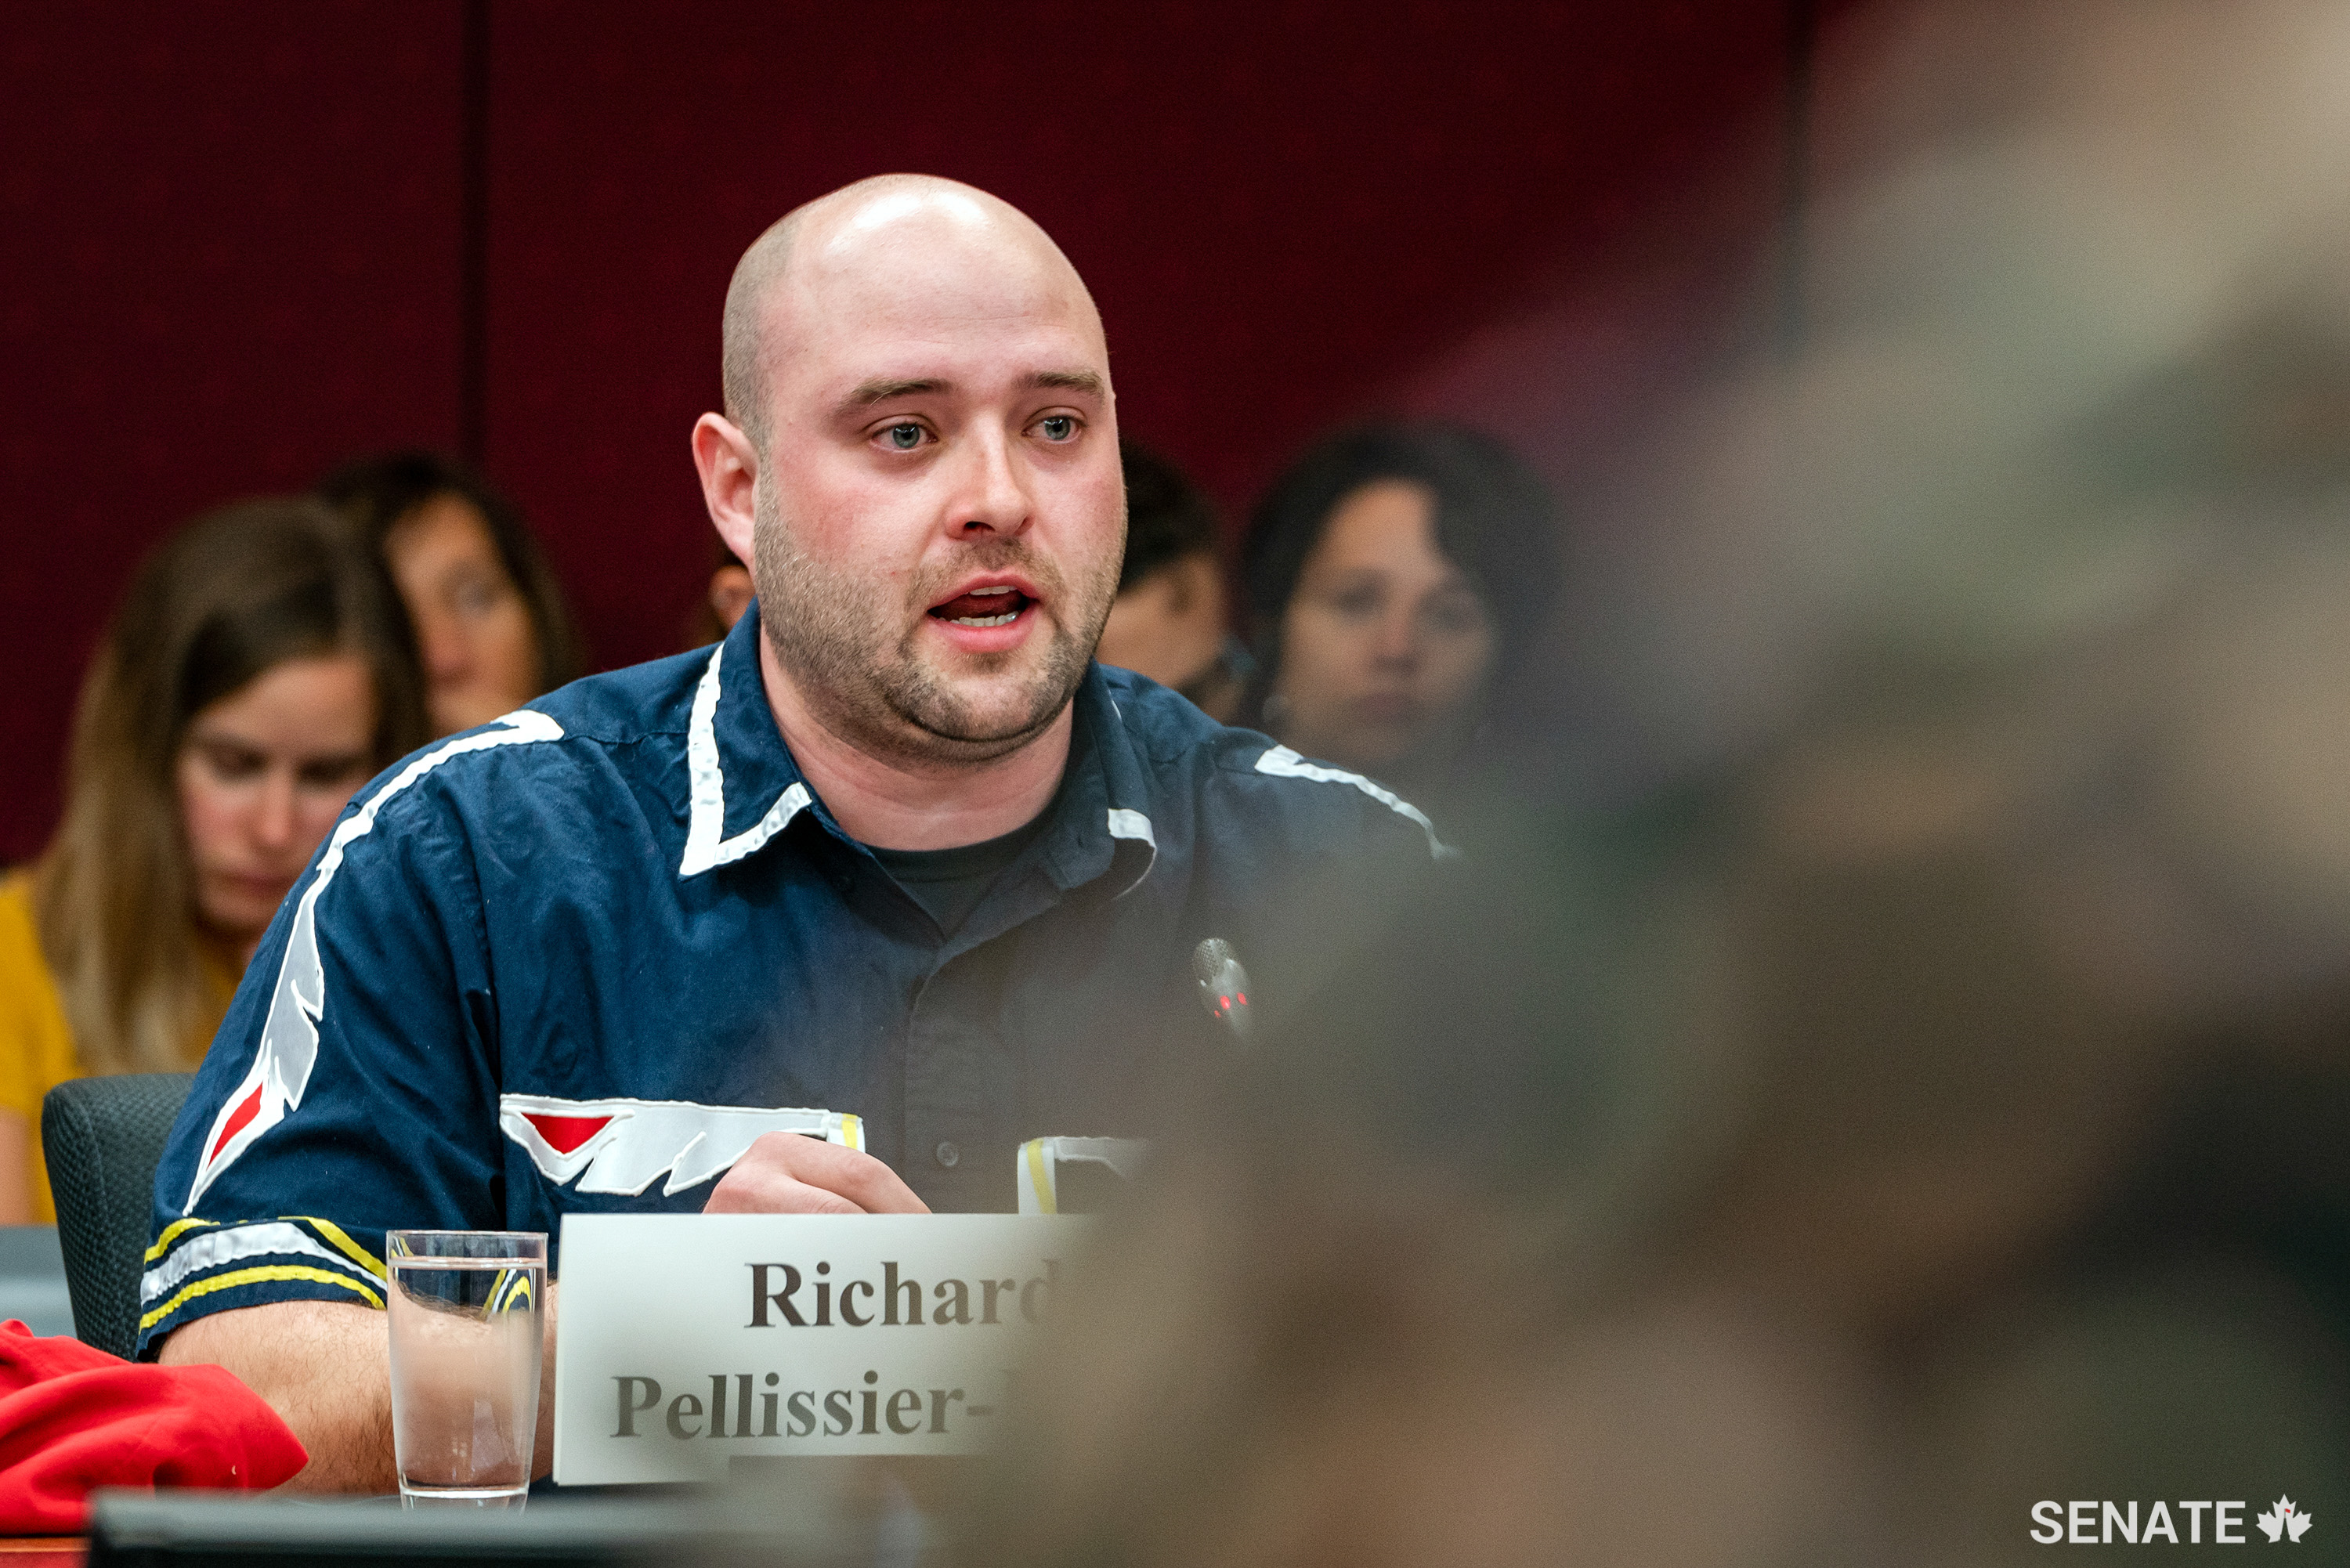 Richard Pellissier-Lush, a 30-year-old First Nations man from Prince Edward Island, was moved to tears while testifying about the gaps in the foster care system that is putting Indigenous children at risk. “If we don’t recognize that and work together to get these at-risk youth back into a support system, back into communities, back into healthy lifestyles, we will lose these youth,” Richard testified.